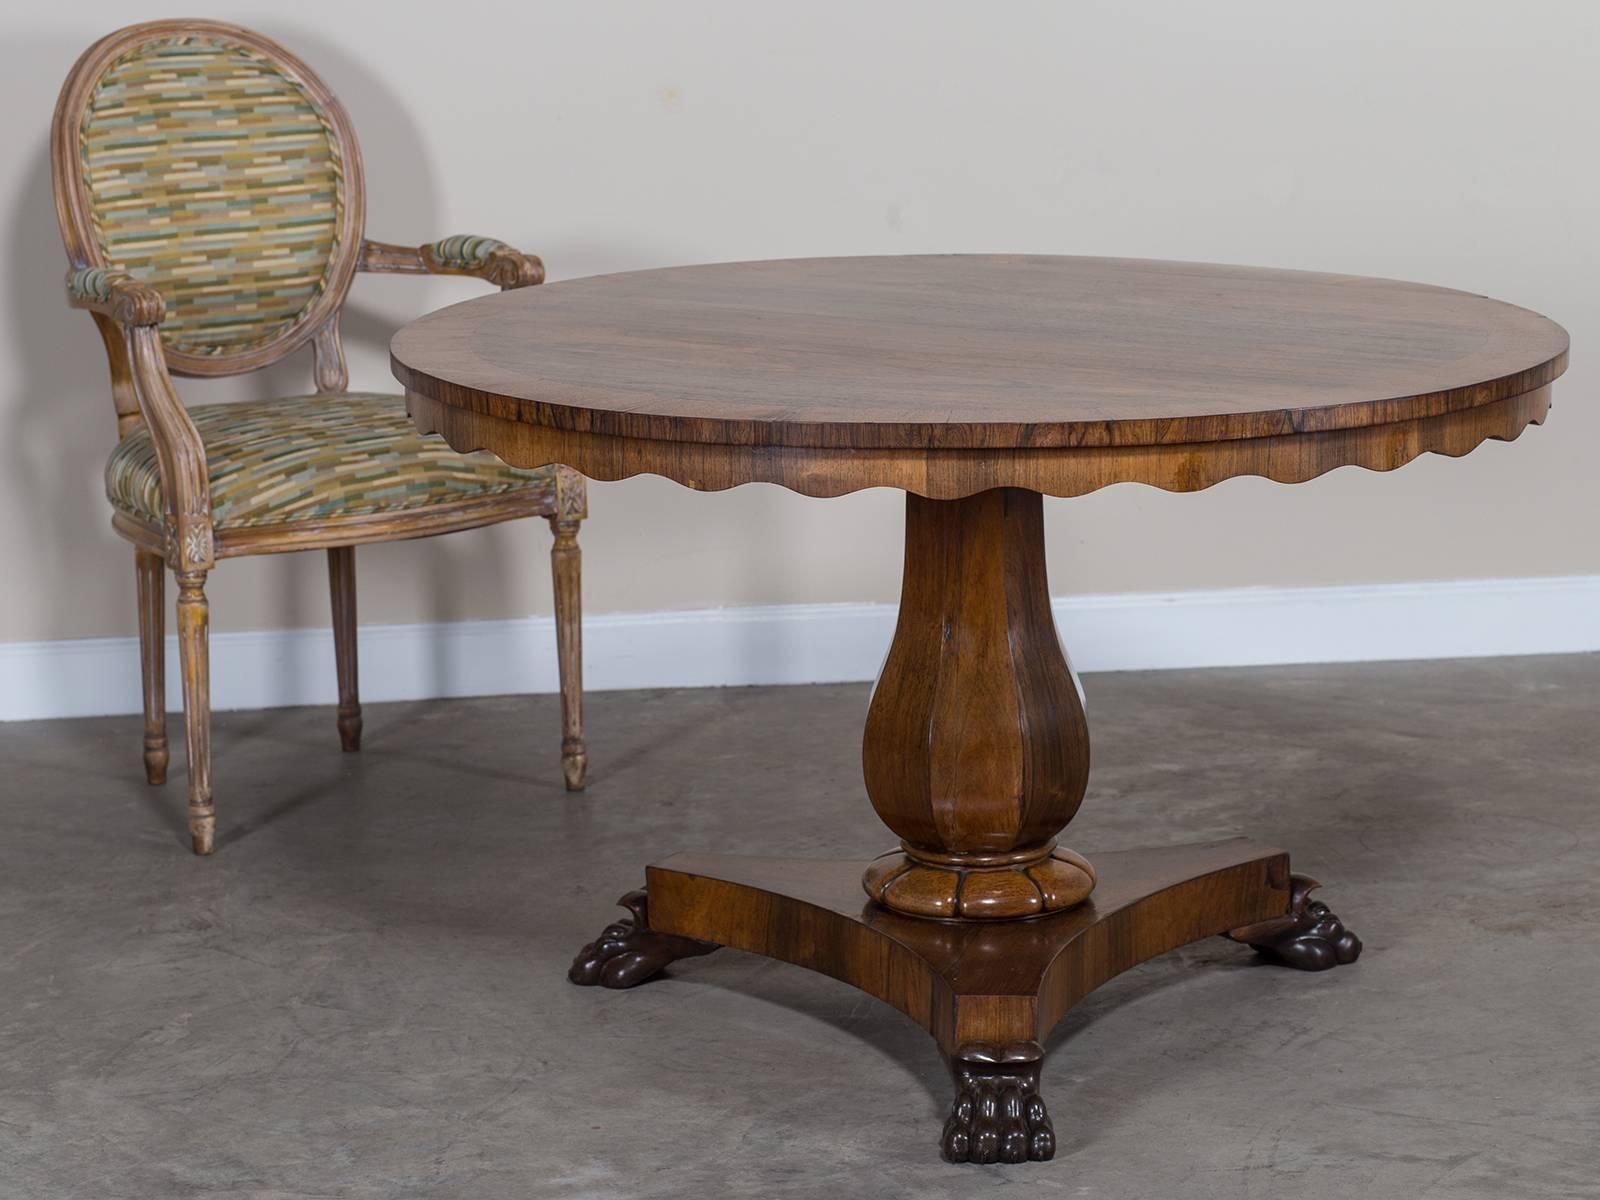 Mid-19th Century Antique English Rosewood and Walnut Tilt-Top Table, circa 1835